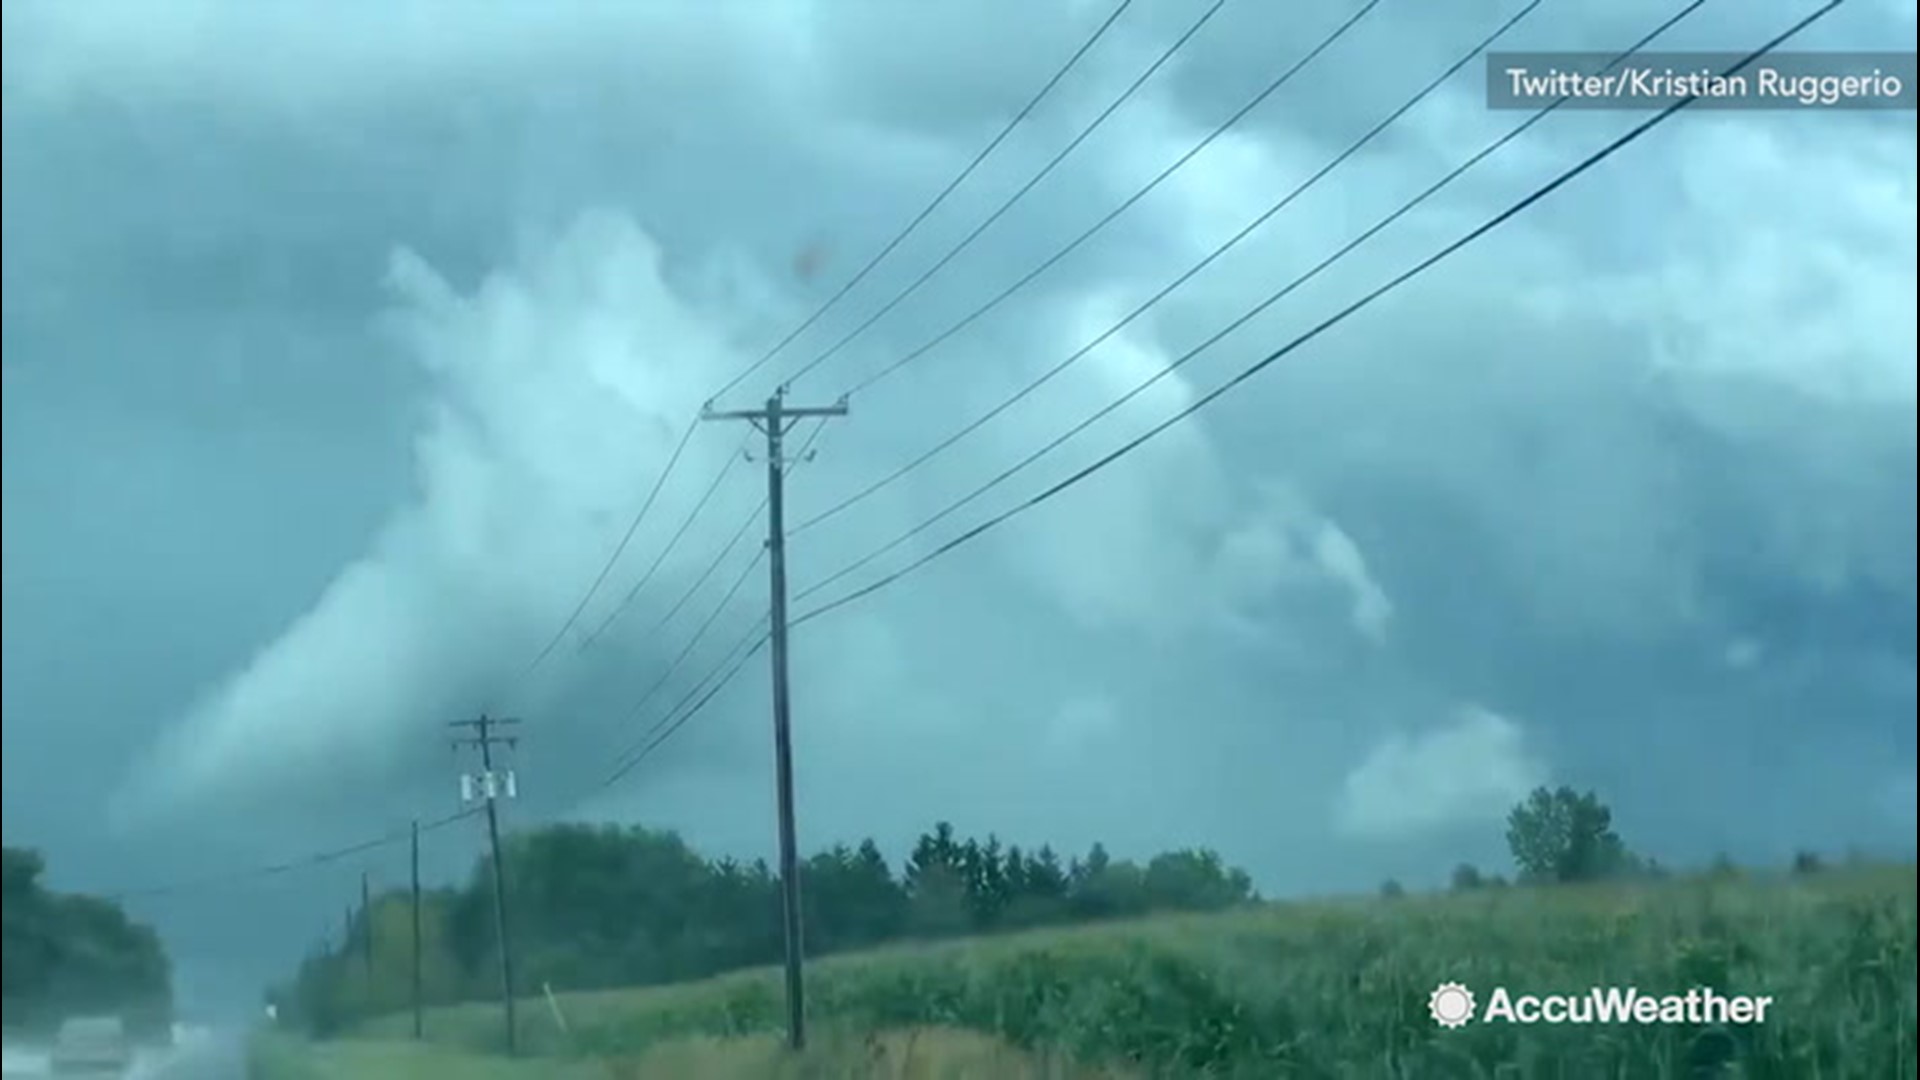 A storm that brewed over Lockport, New York, on Aug. 16 was recorded as it grew to an incredible size. This time-lapse shows just how impressive the inflow on the storm was.